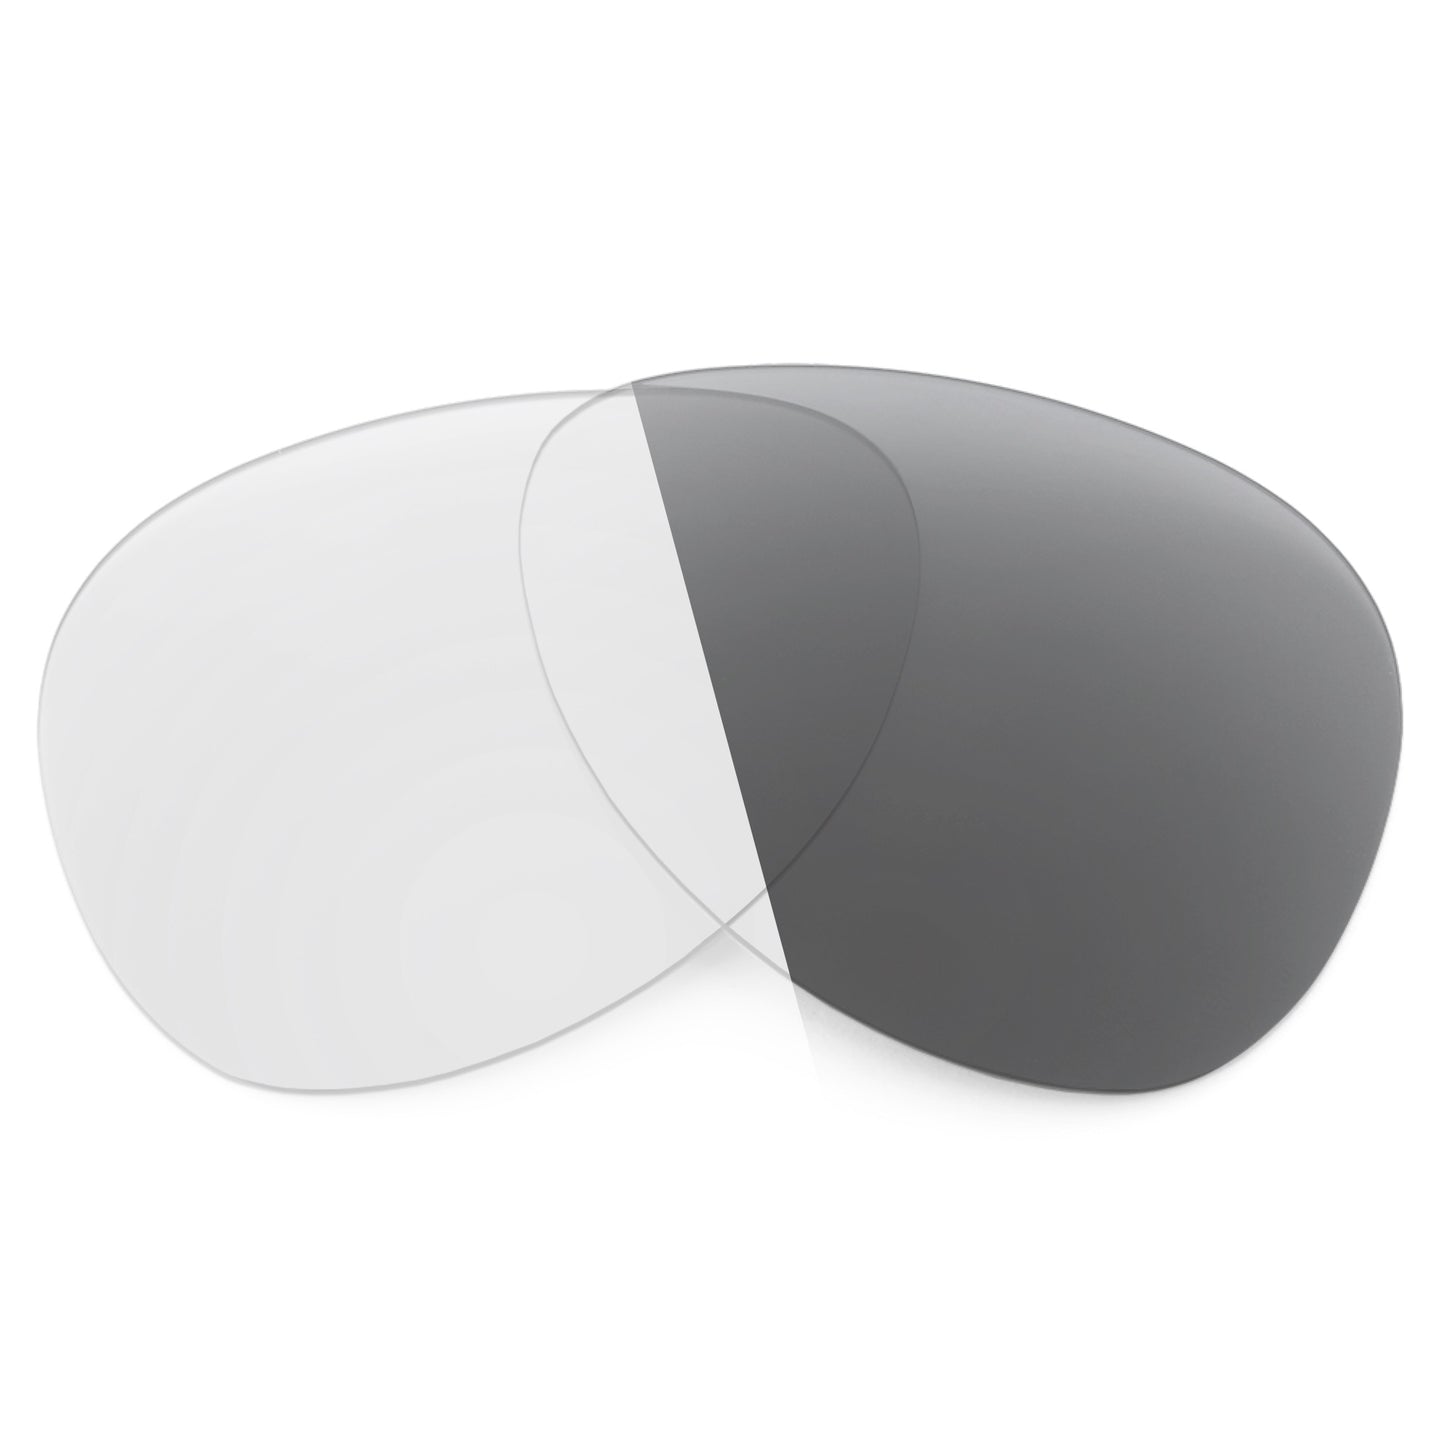 Revant replacement lenses for Electric Caffeine Non-Polarized Adapt Gray Photochromic